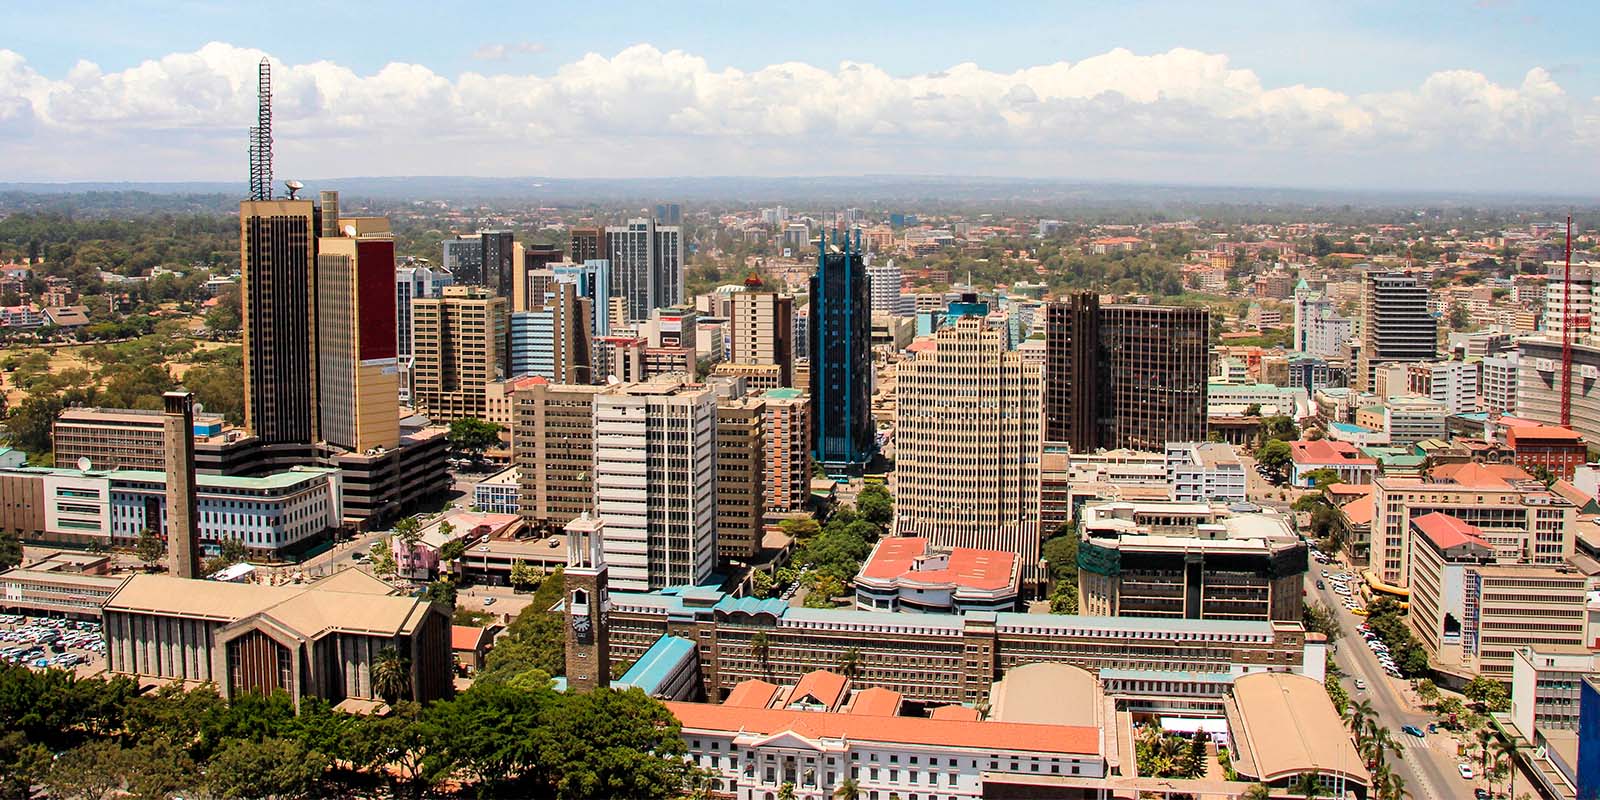 Kenya's GDP has had an average growth rate of 4.62% in the past decade and a half and is primed to continue to grow